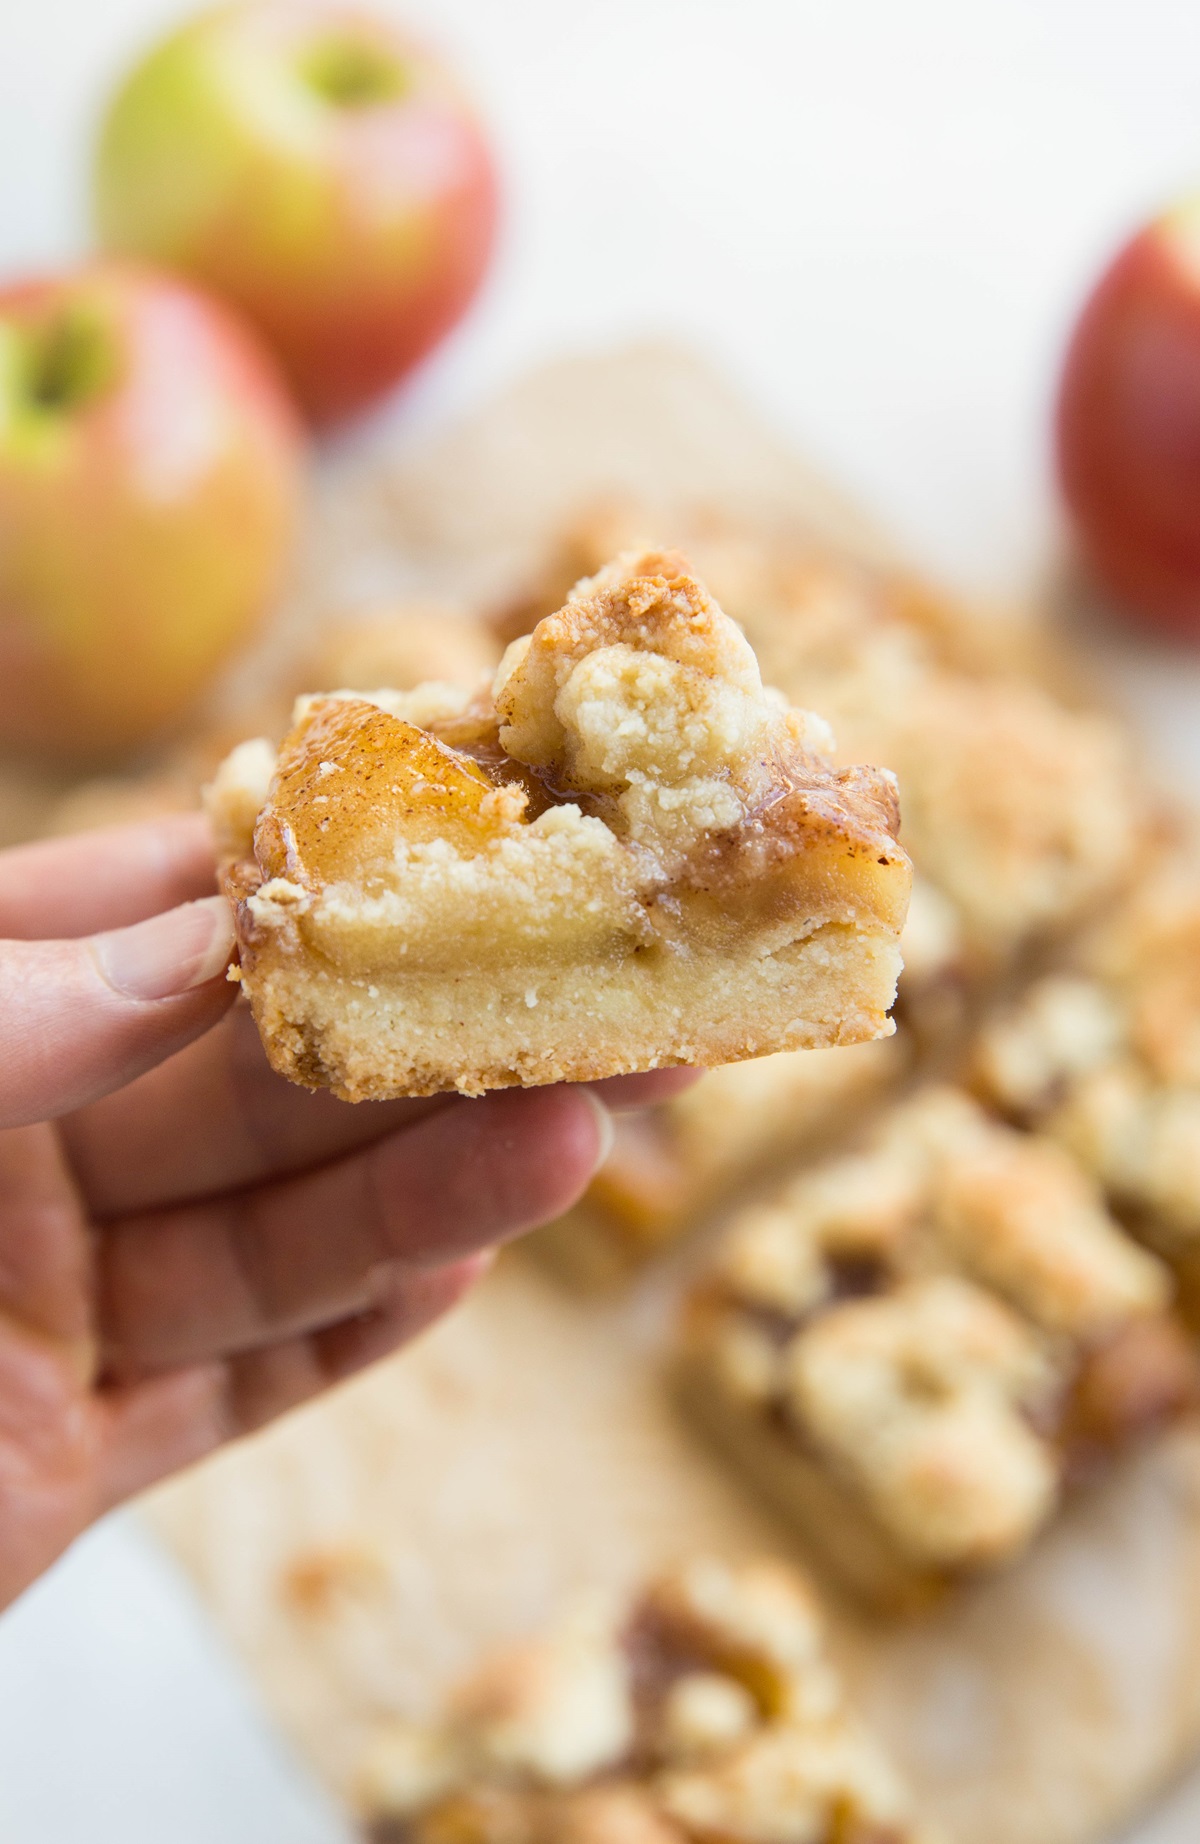 Vegan and Paleo Apple Crumb Bars made with almond flour and pure maple syrup. Grain-free, egg-free, dairy-free.